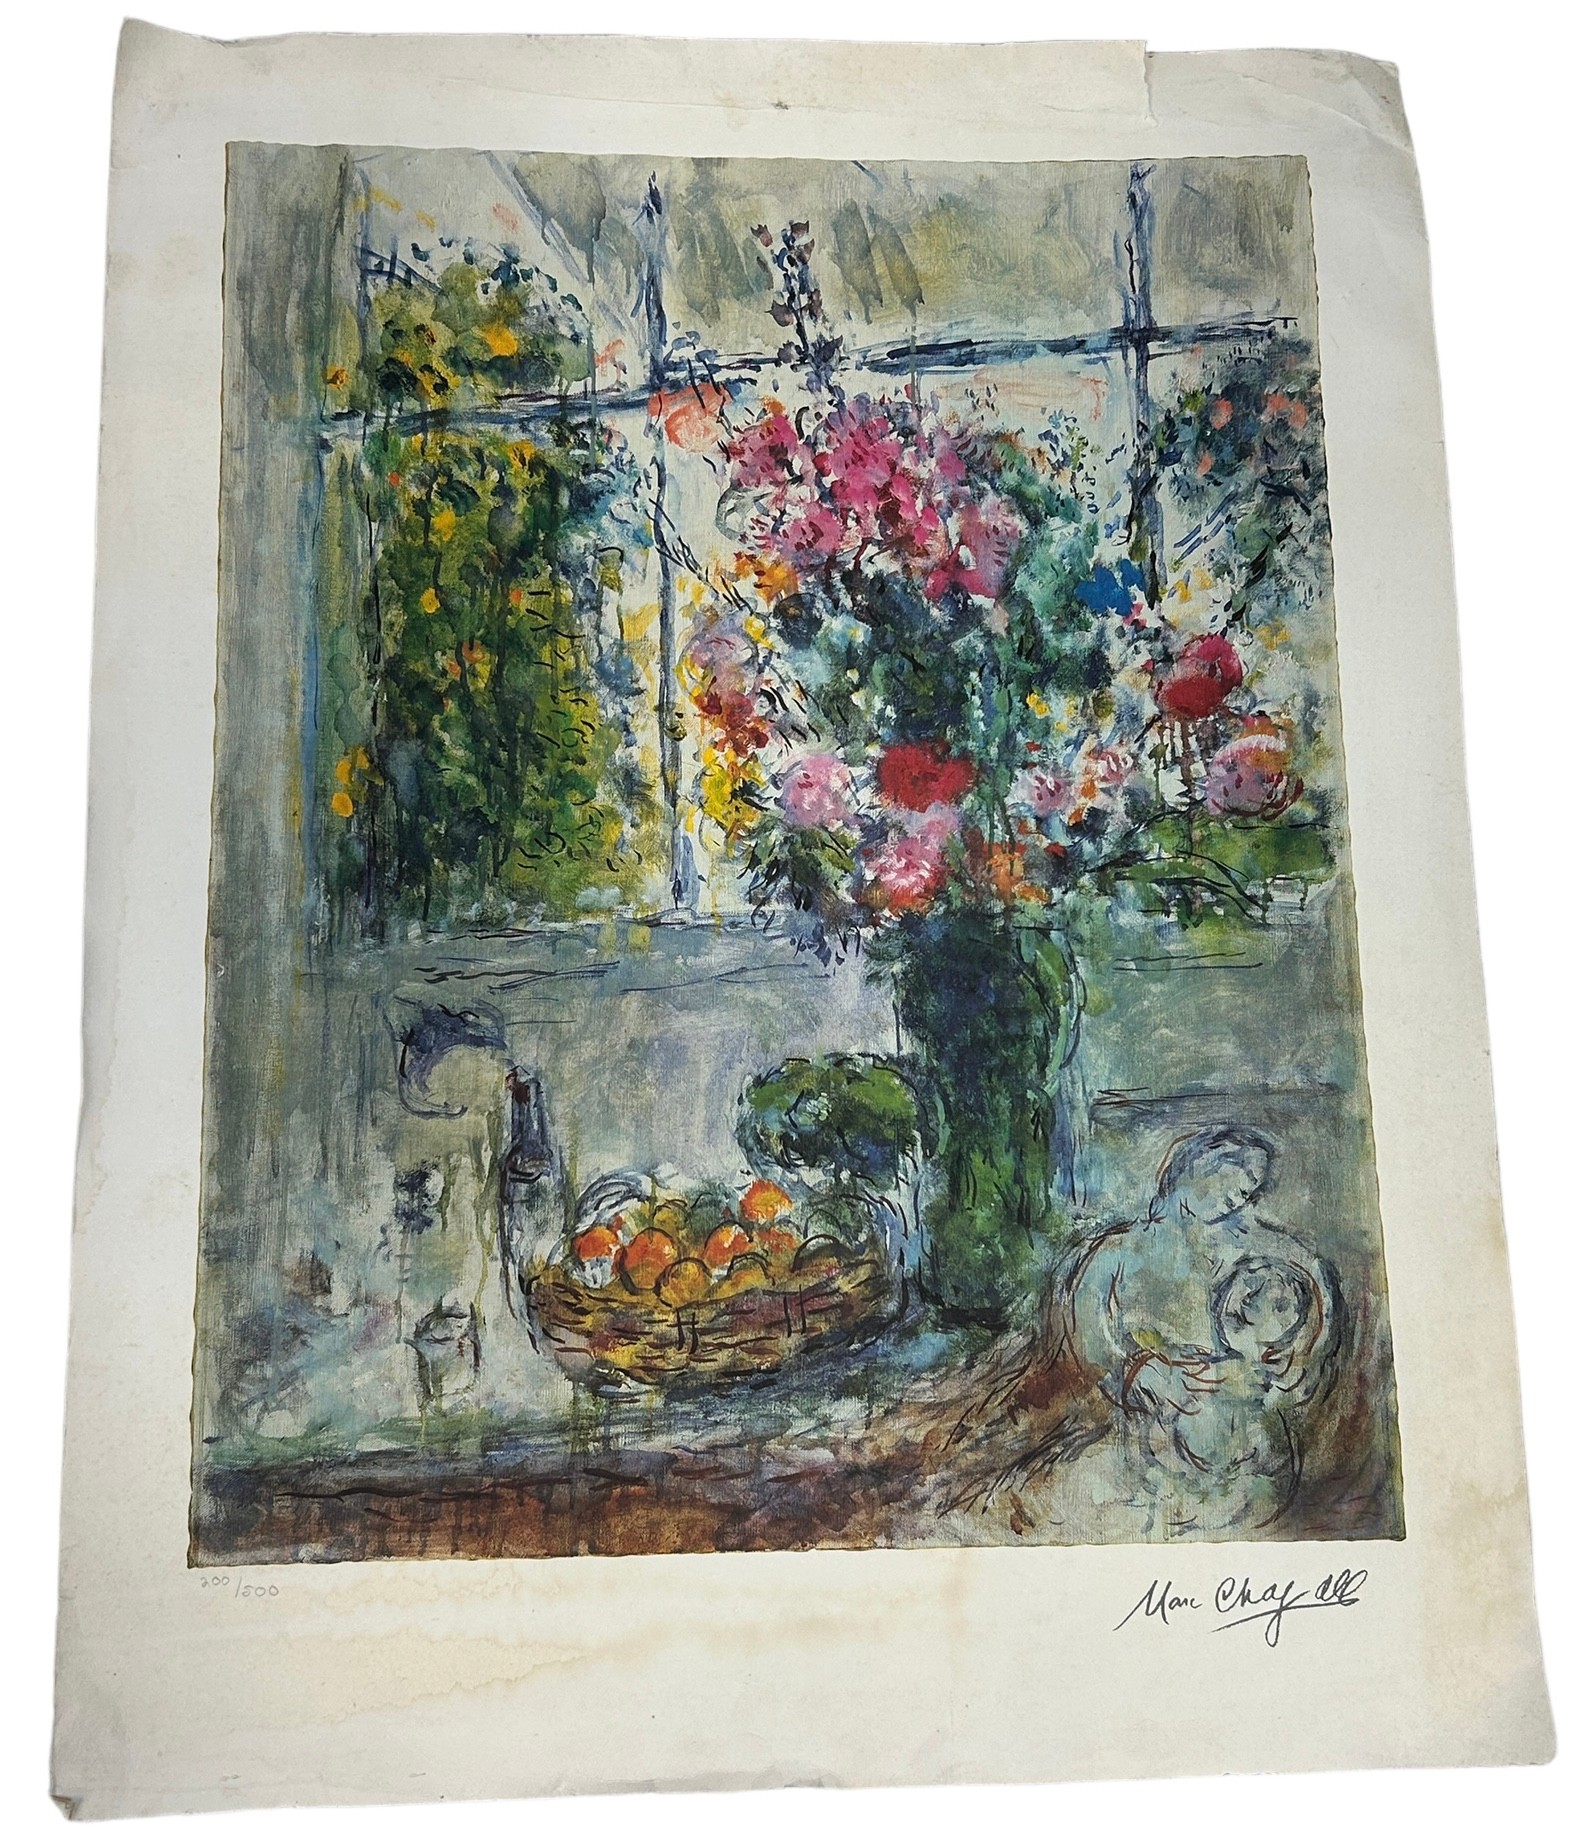 MARC CHAGALL (1887-1985) A LITHOGRAPH, PENCIL NUMBERED EDITION, SIGNED IN THE PLATE, Sheet size 80cm